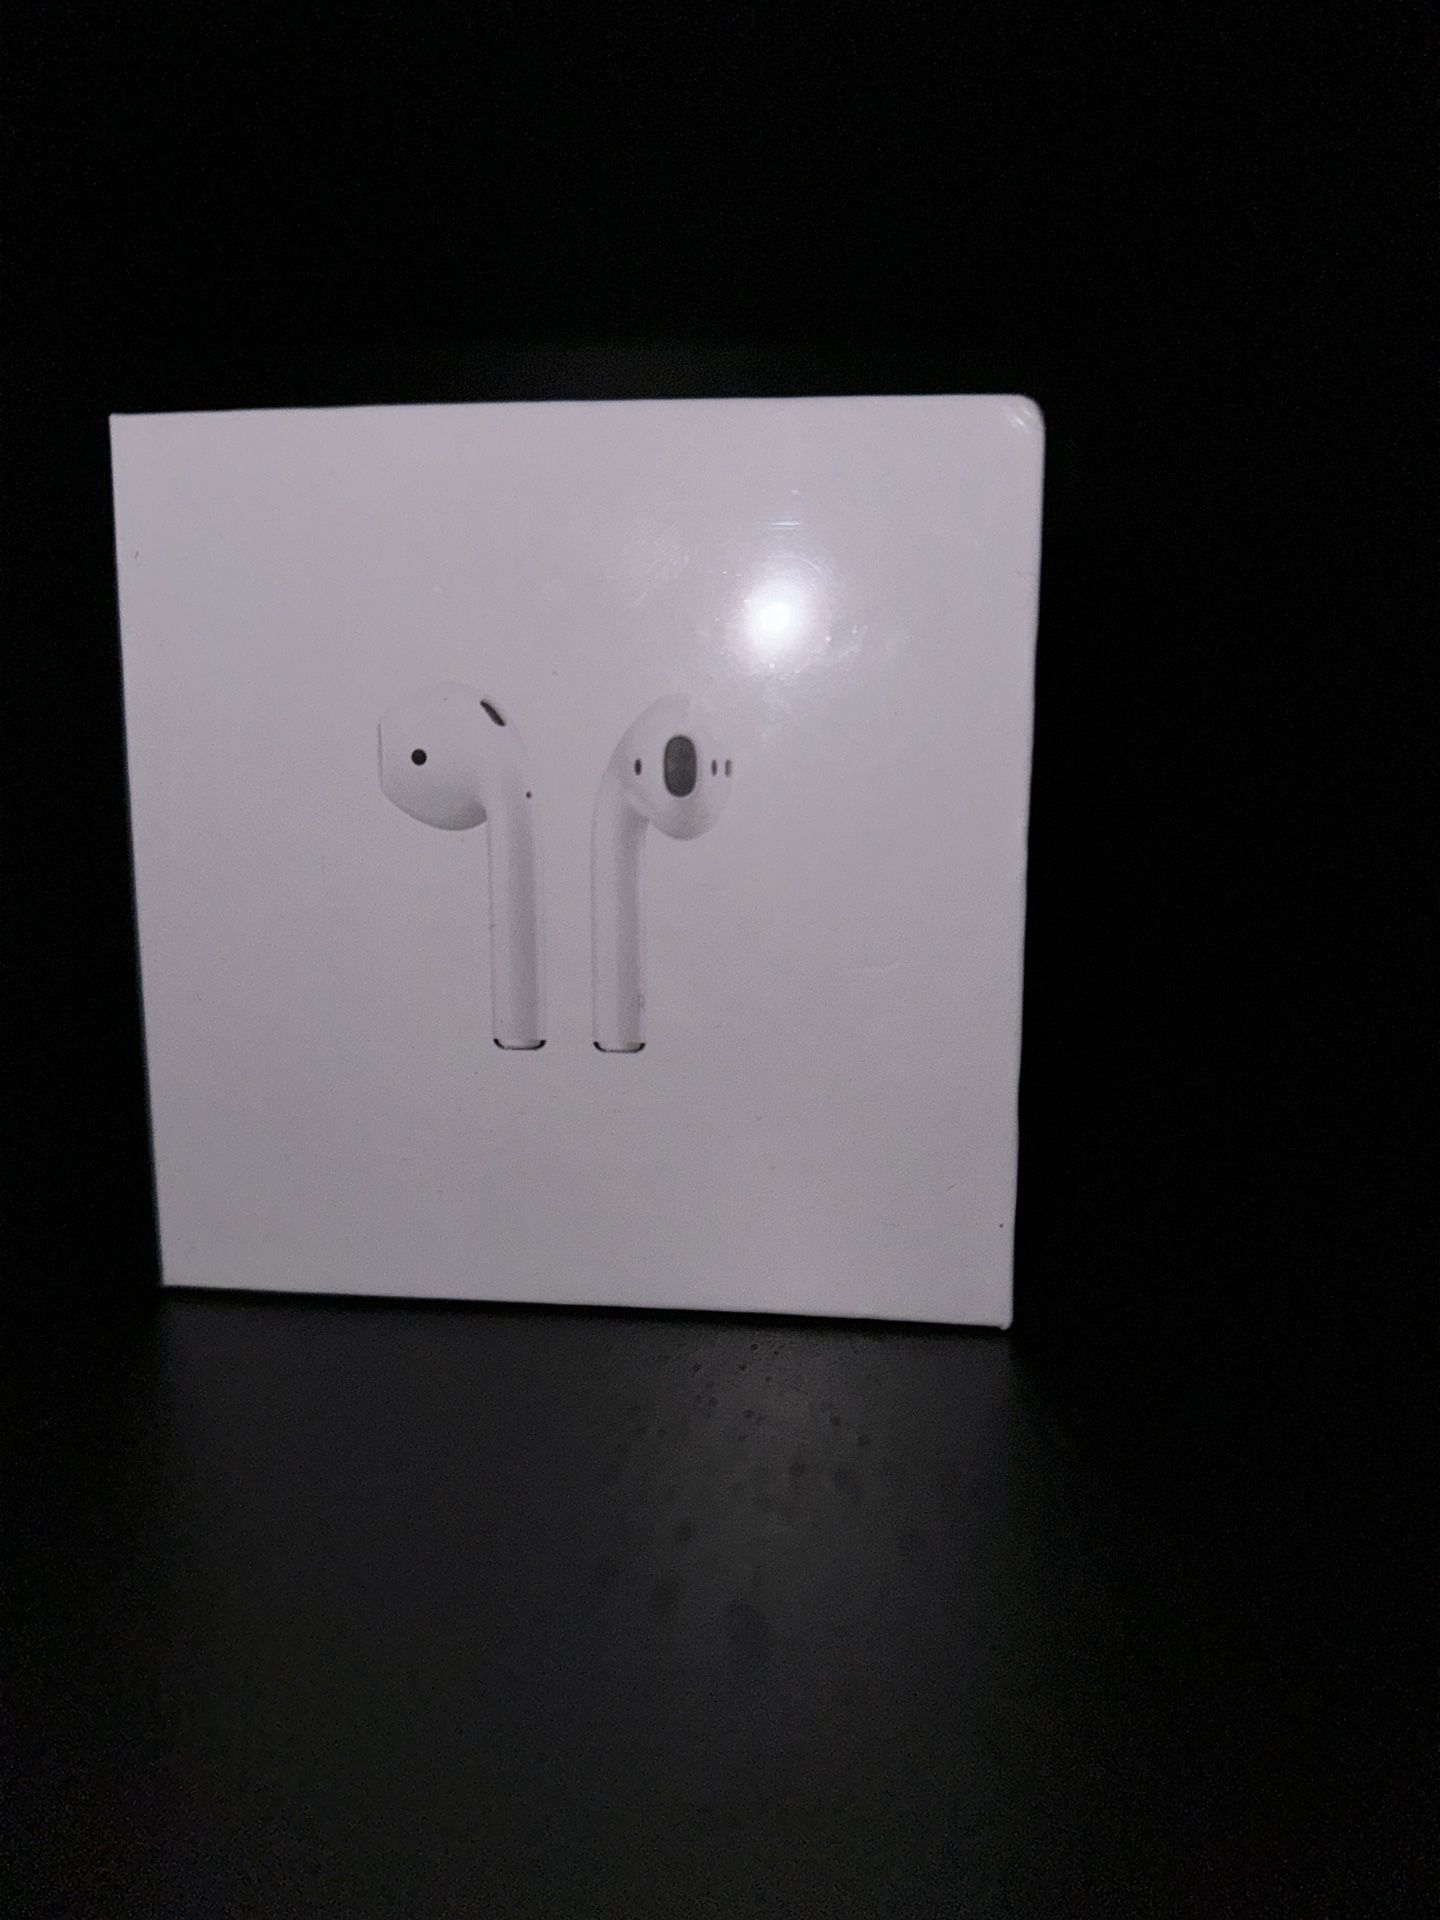 Apple AirPods 2generation